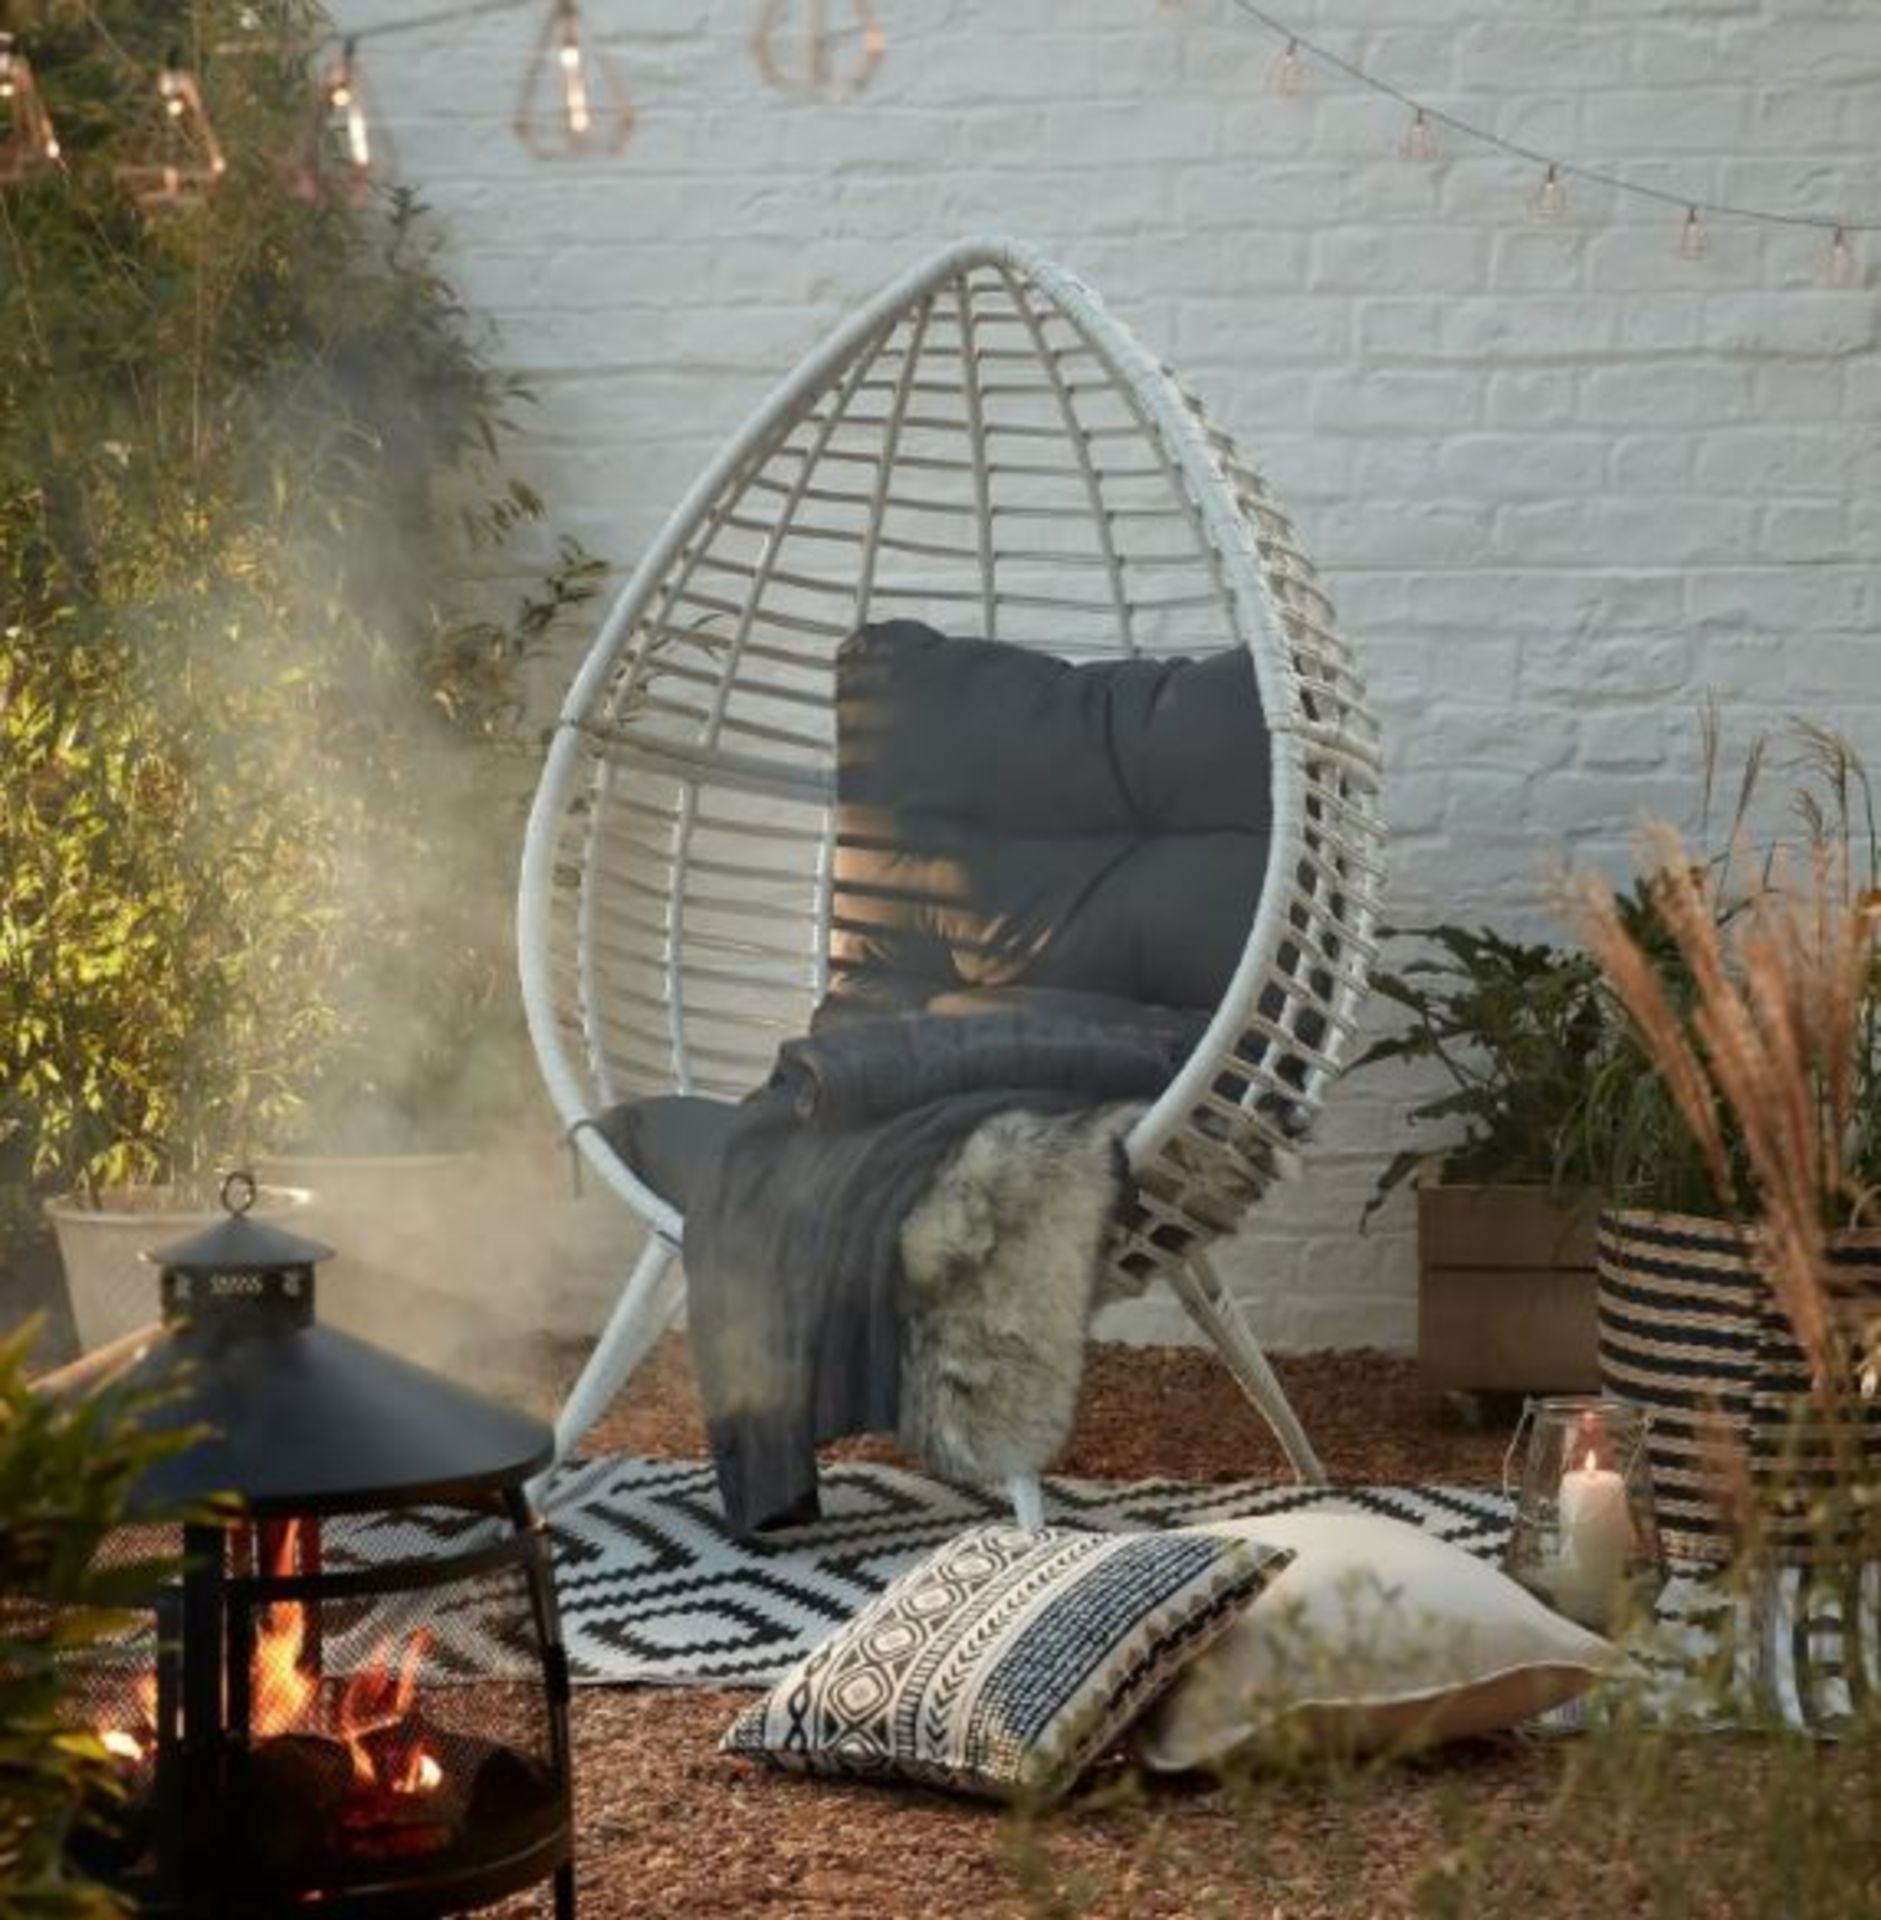 (R16) 1x Rattan Pod Egg Chair White RRP £350. (H156 x W101 x D89 cm ) No Fixings With This Unit.